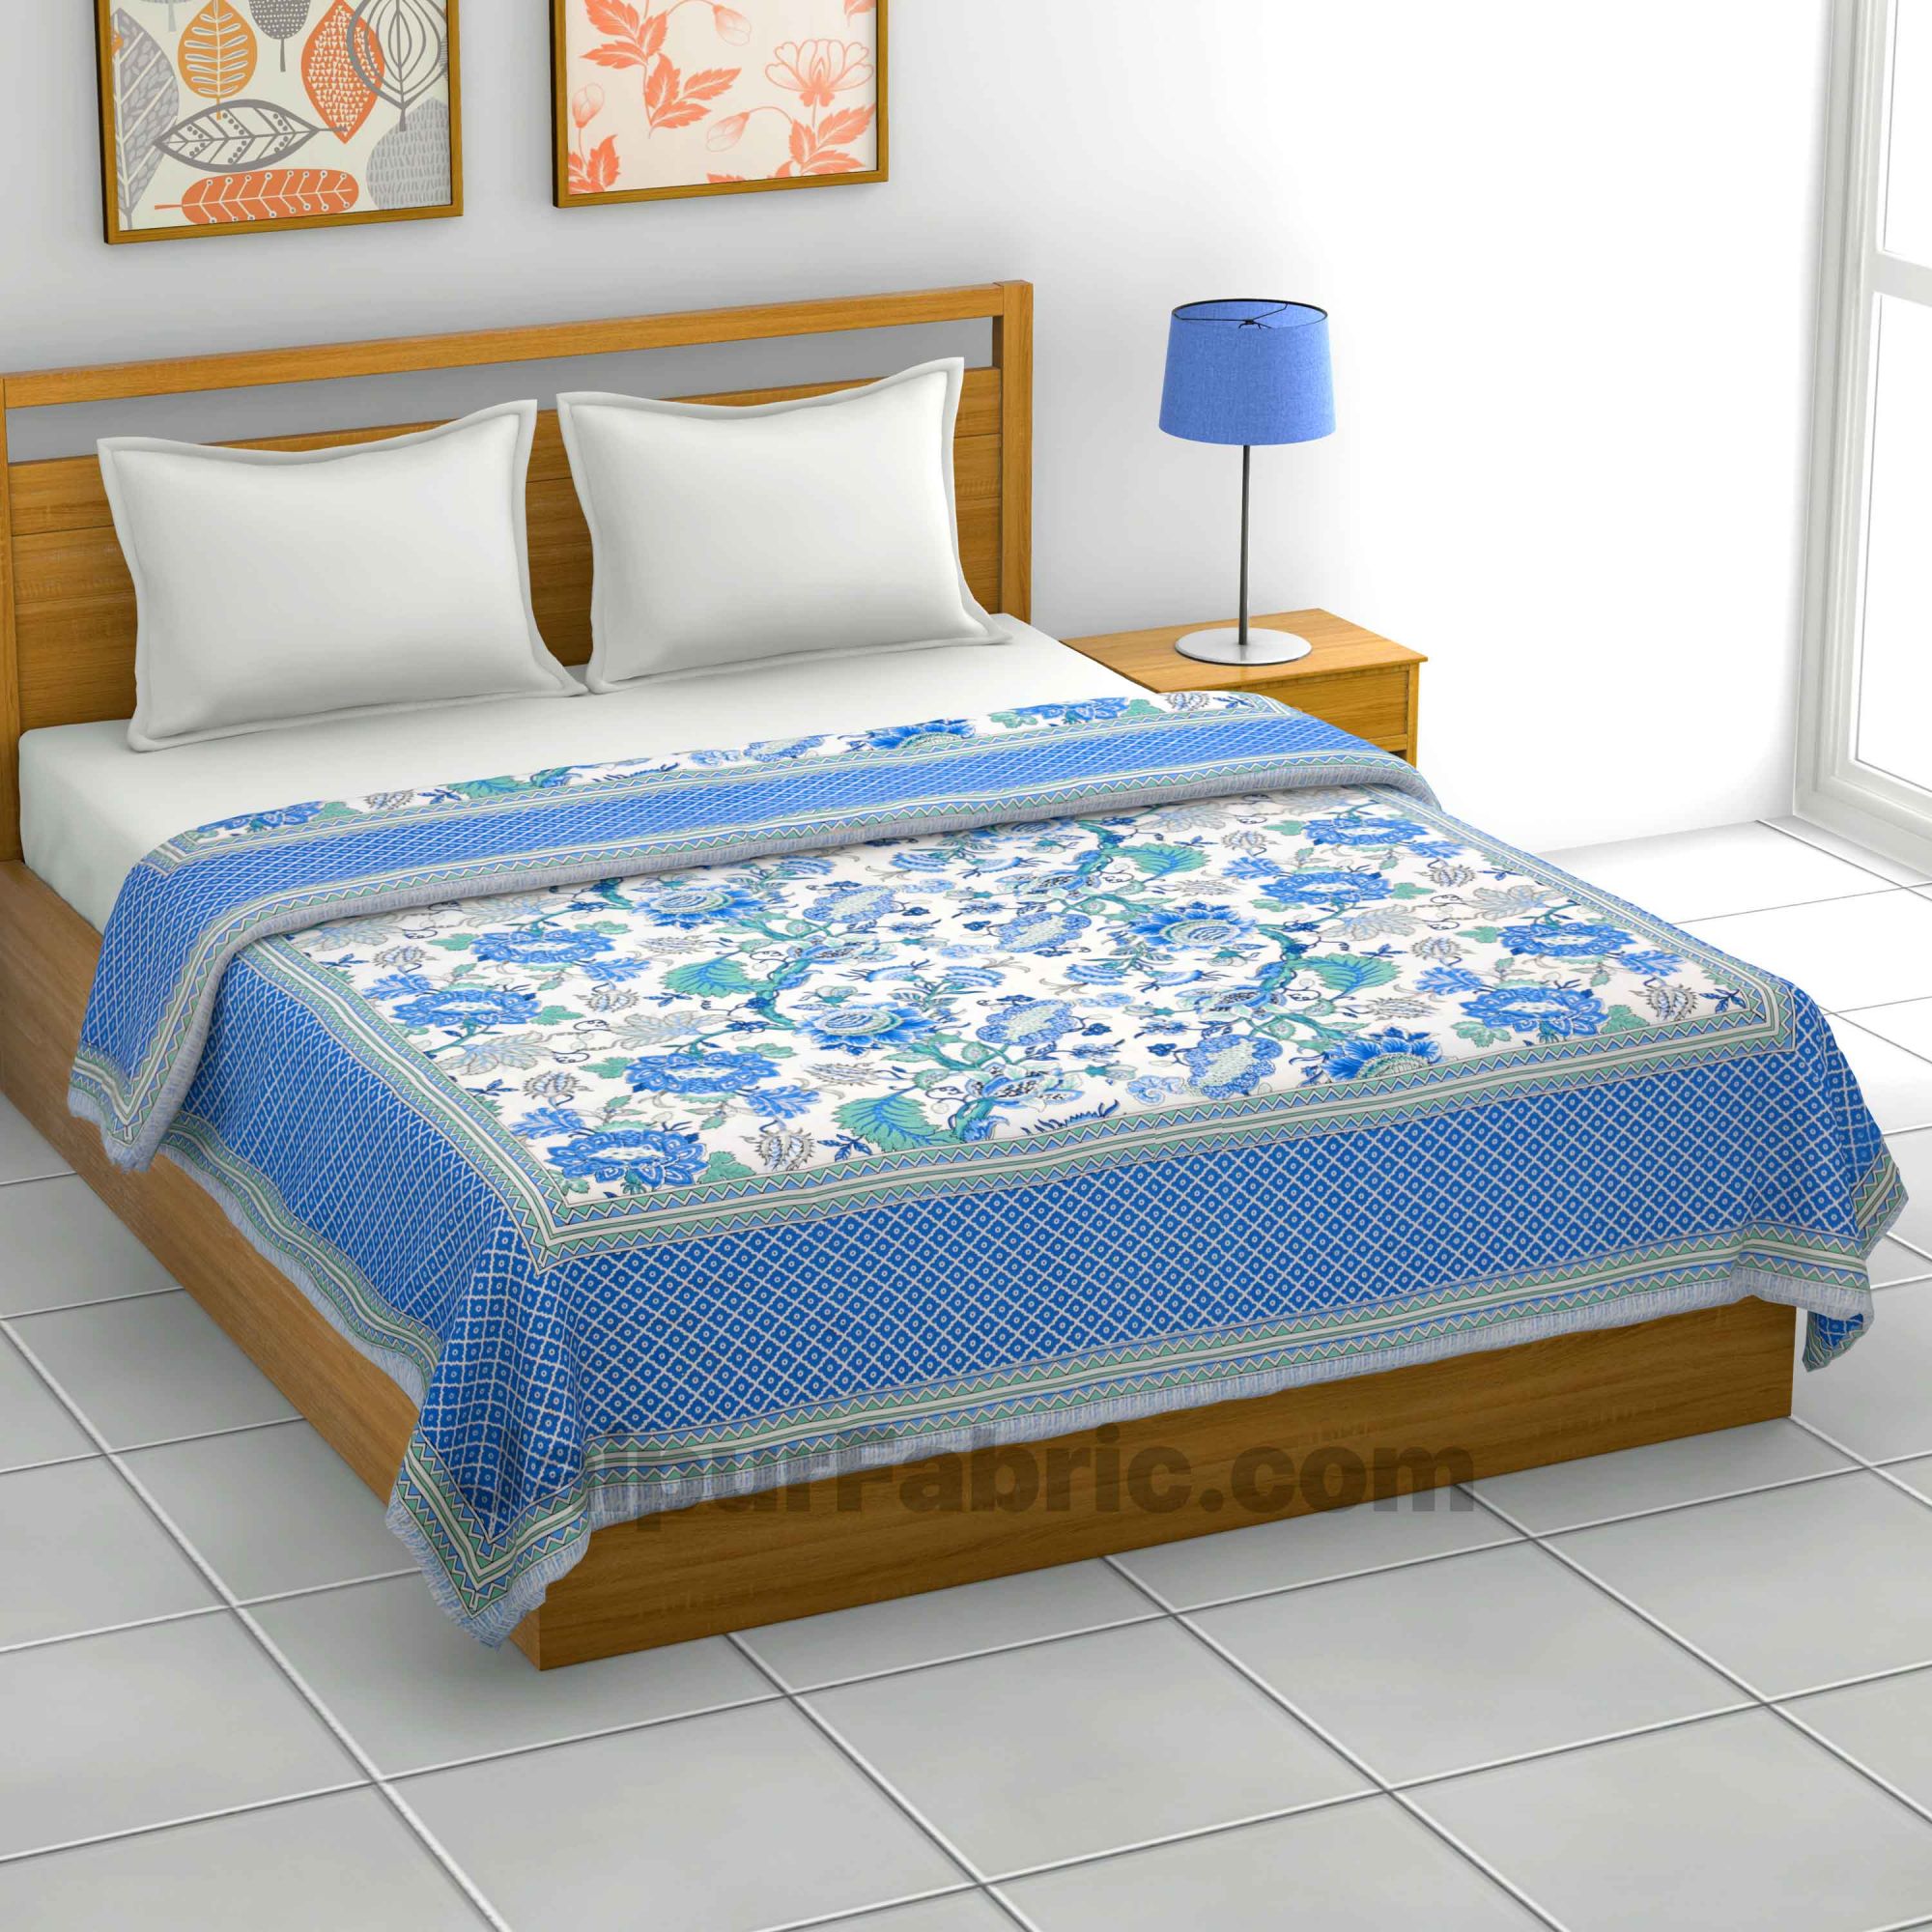 Combo371 Bed in a Bag Blue Floral  1 Dohar + 1 Double BedSheet + 2 Pillow Covers